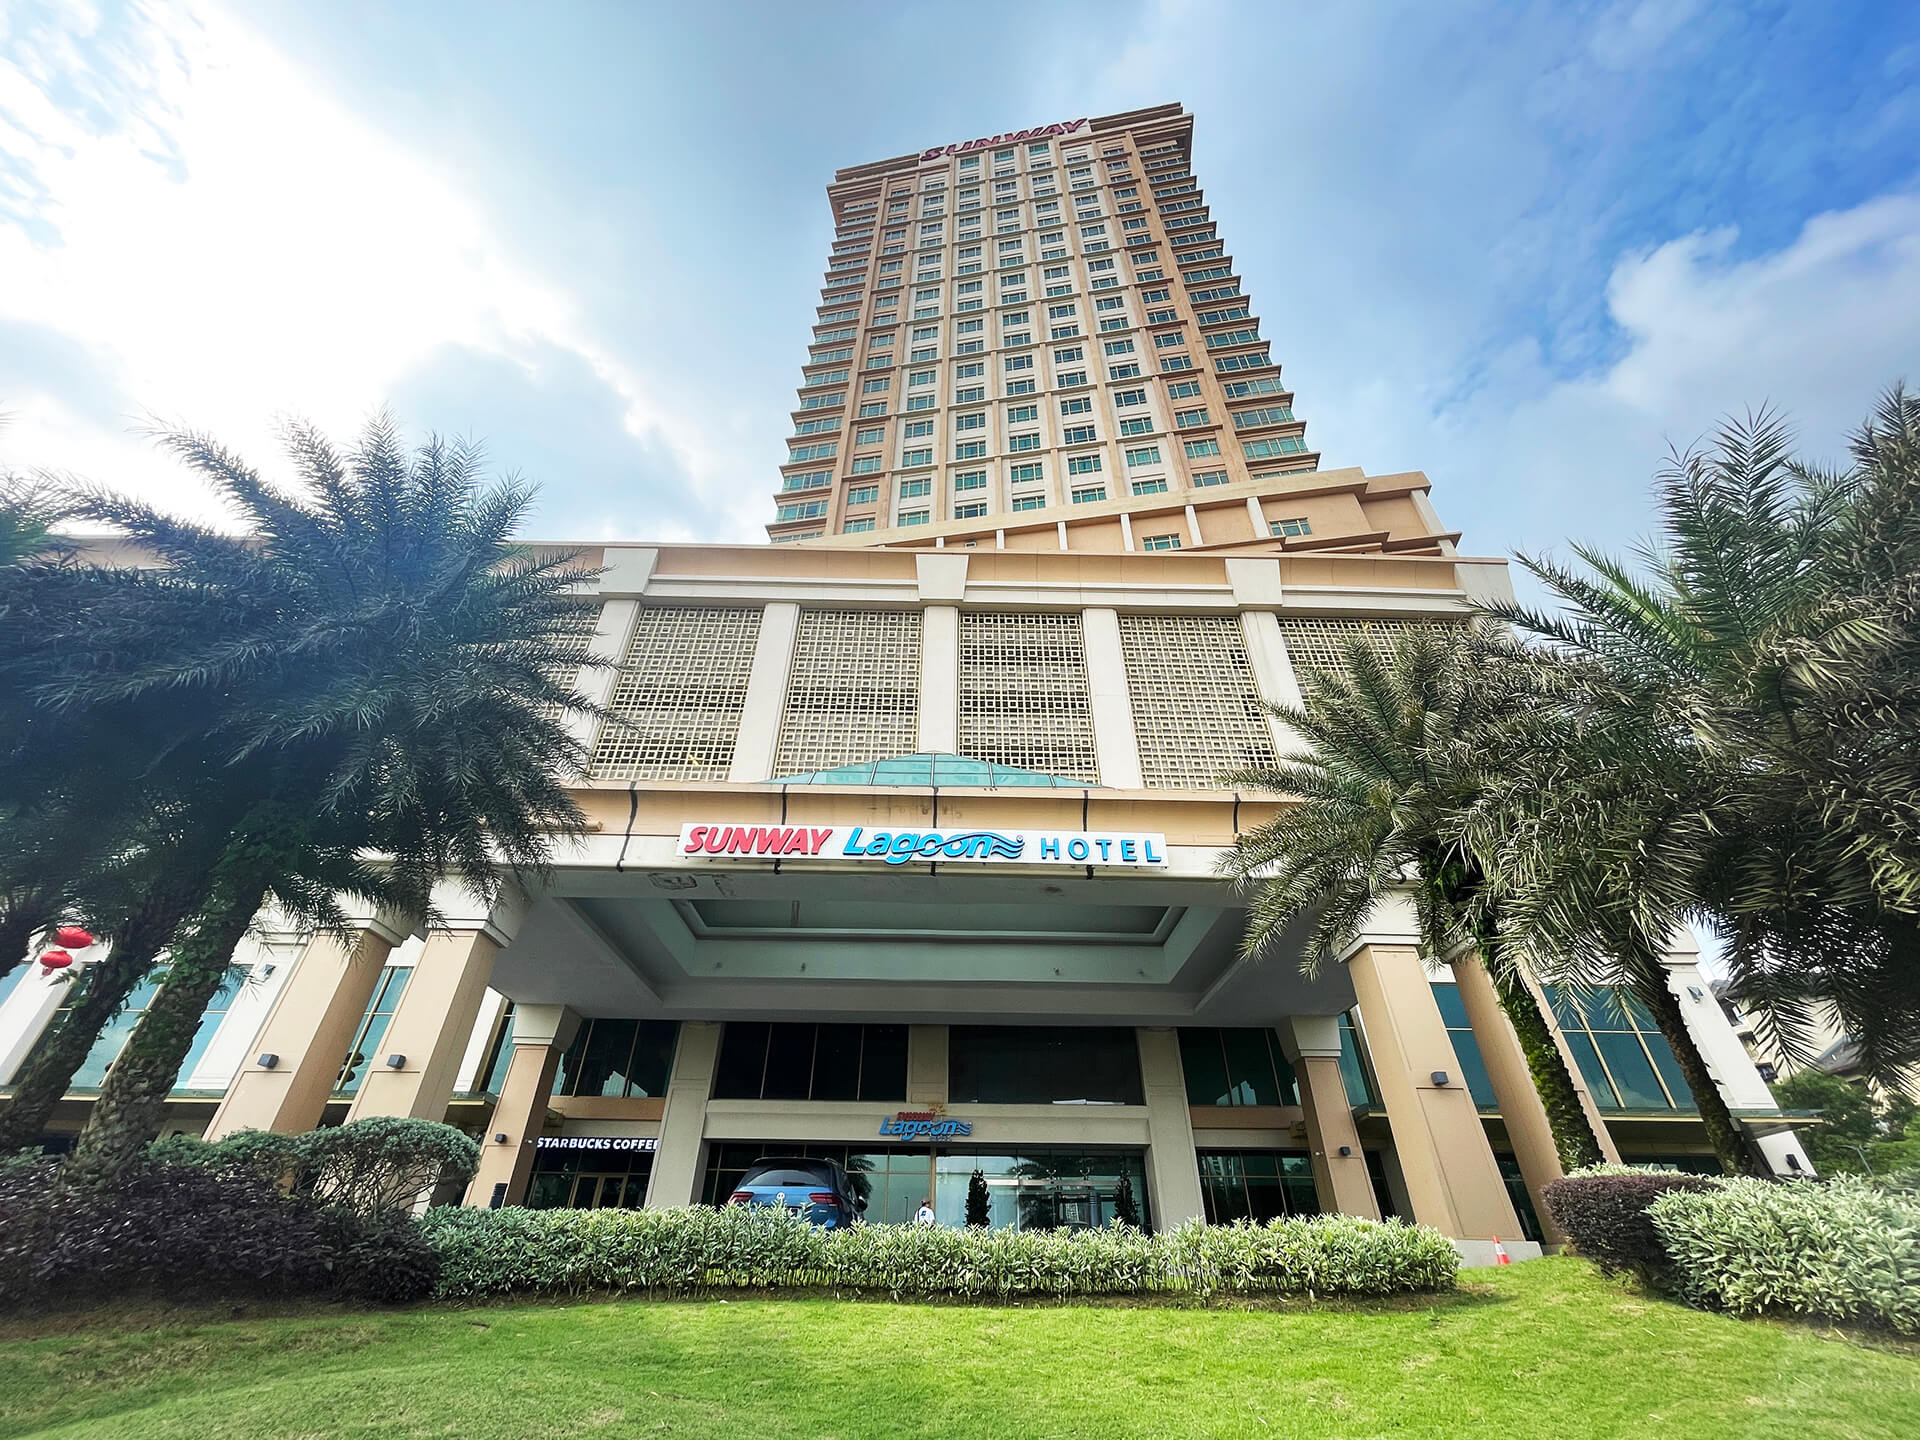 Enjoy unparalleled convenience and connectivity at the 4-star Sunway Lagoon Hotel!